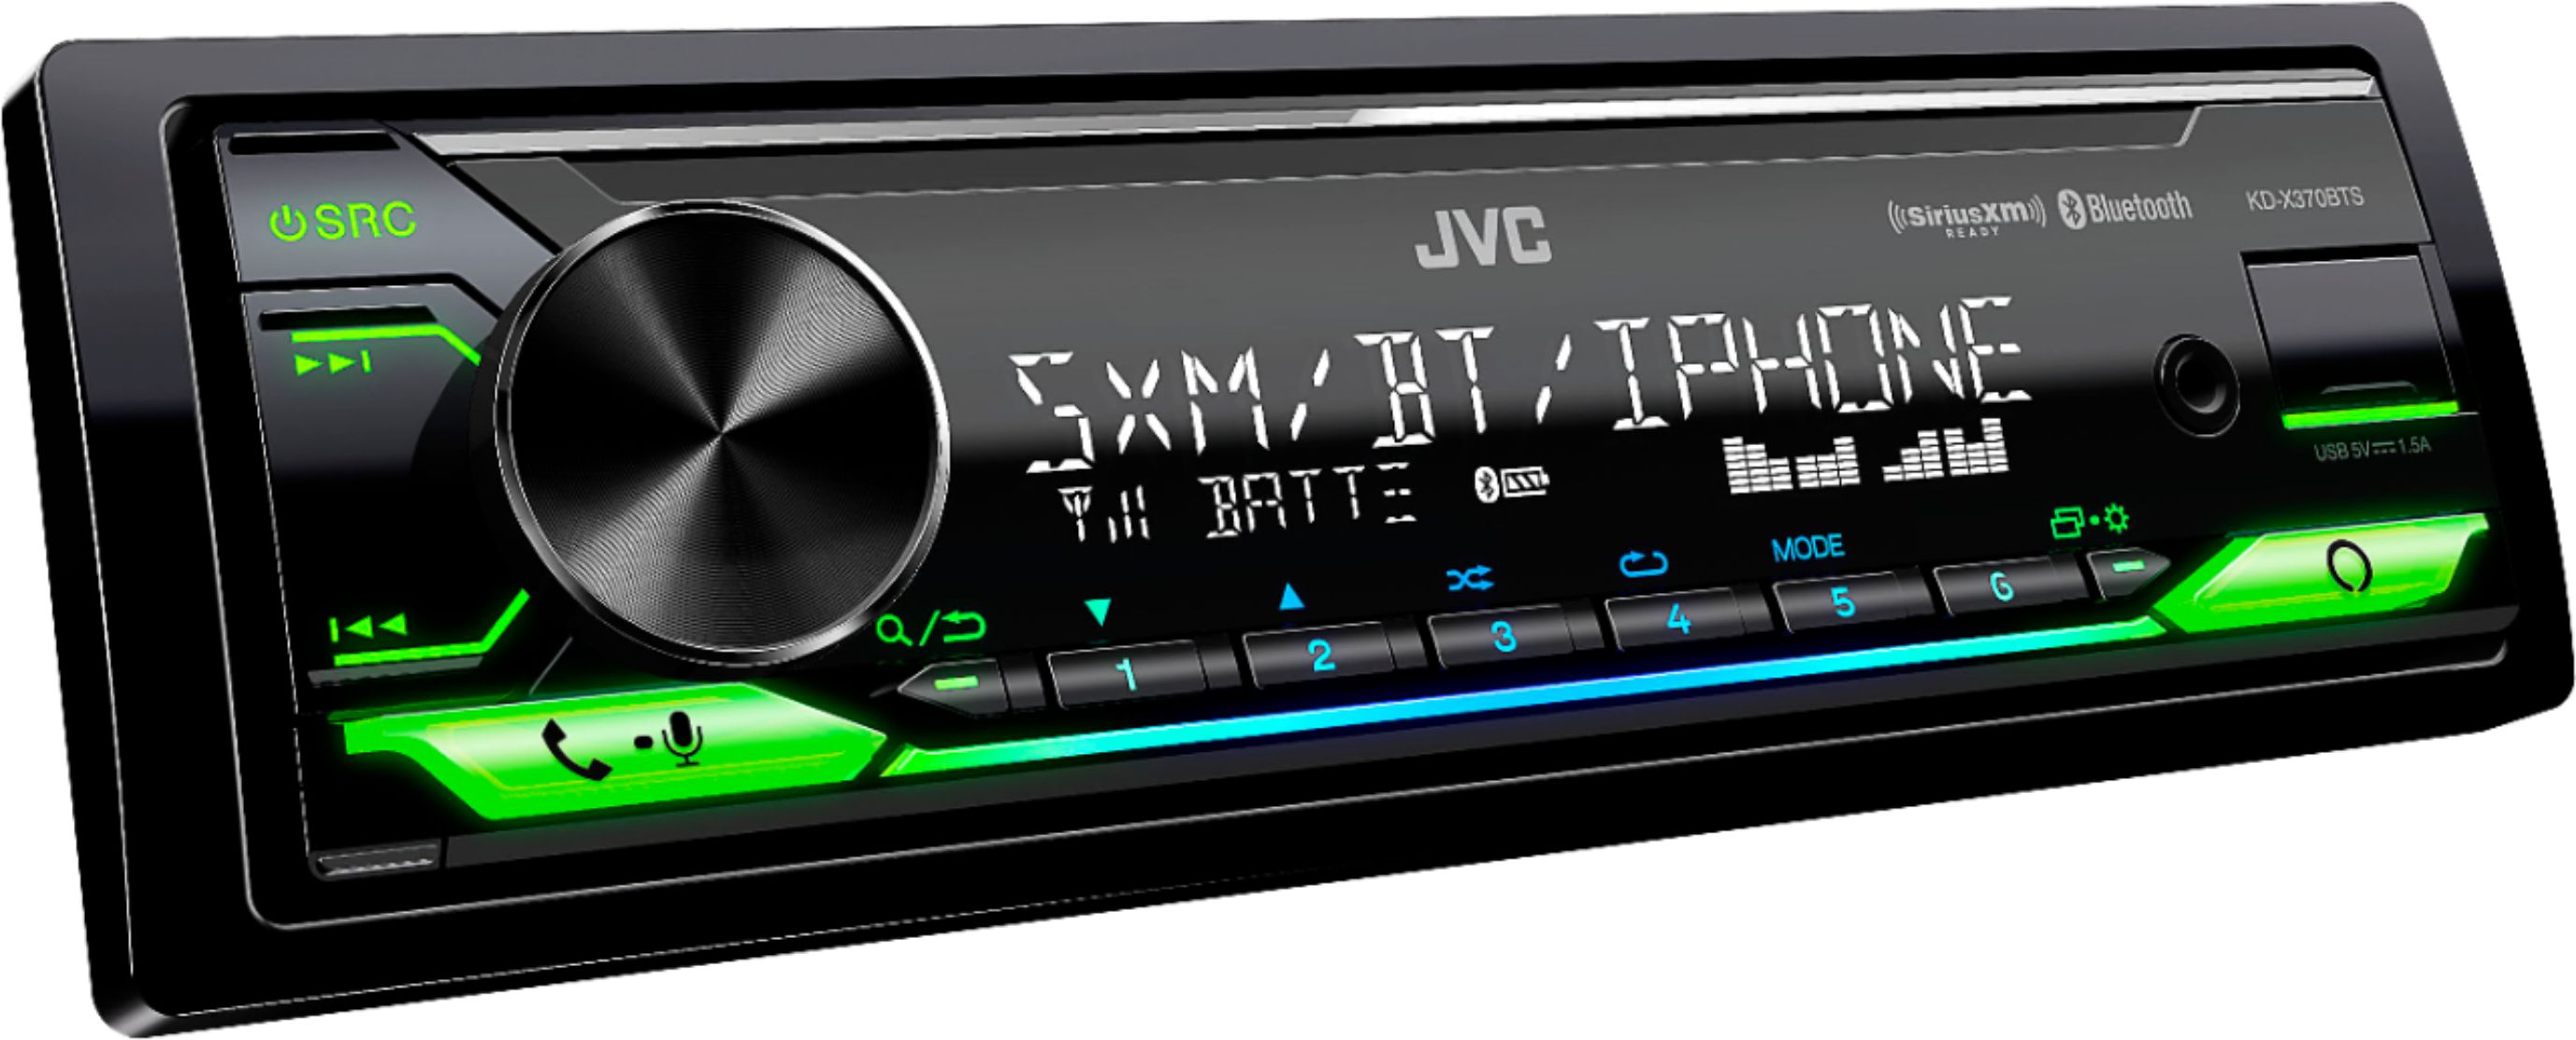 Angle View: JVC - In-Dash Digital Media Receiver - Built-in Bluetooth - Satellite Radio-ready with Detachable Faceplate - Black